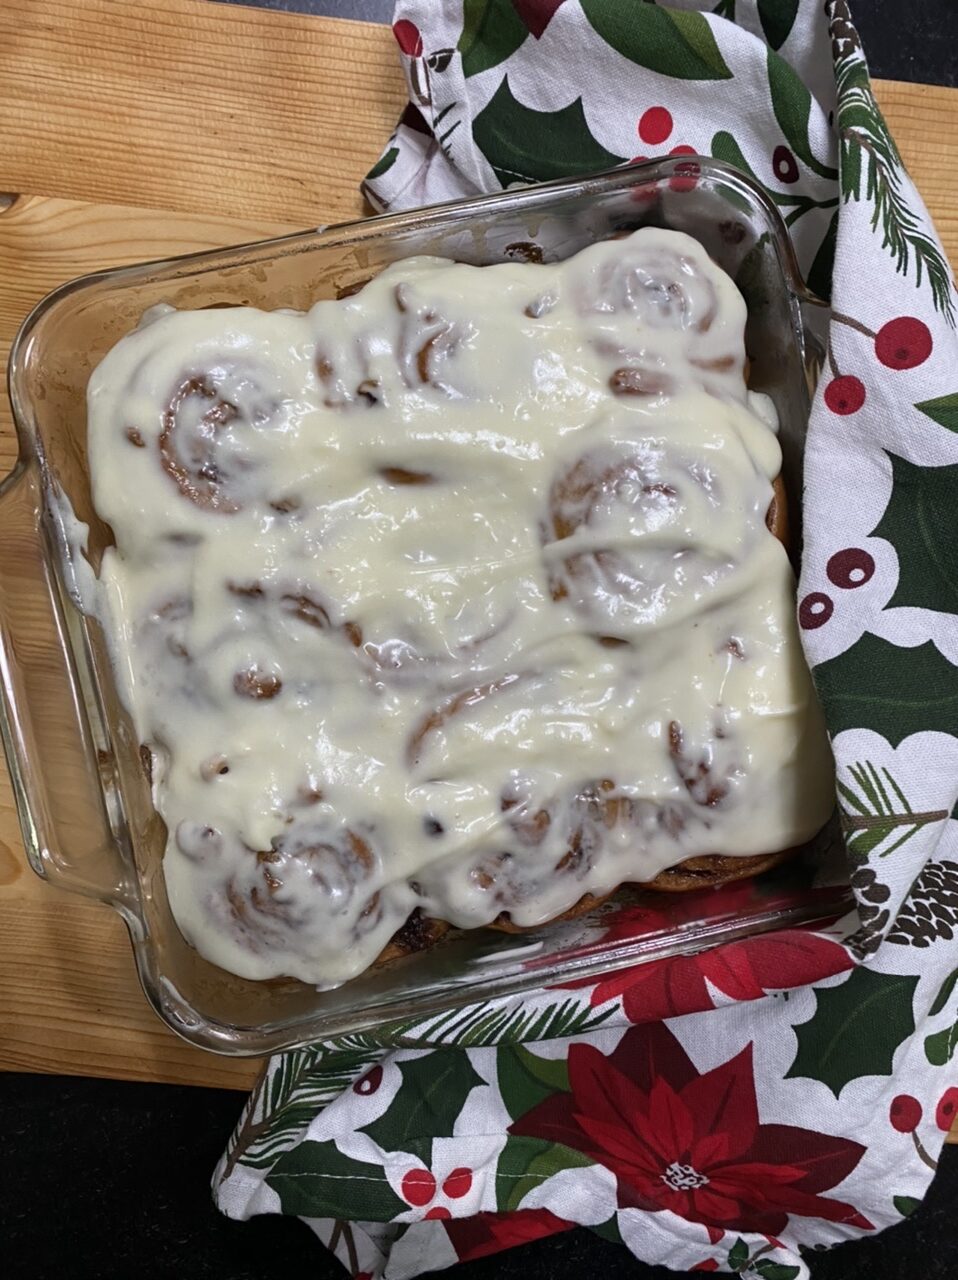 6C90A7EB EBA7 471F 961C 1F33CC27C7AA e1608751253787 - Cinnamon Rolls with Eggnog Frosting